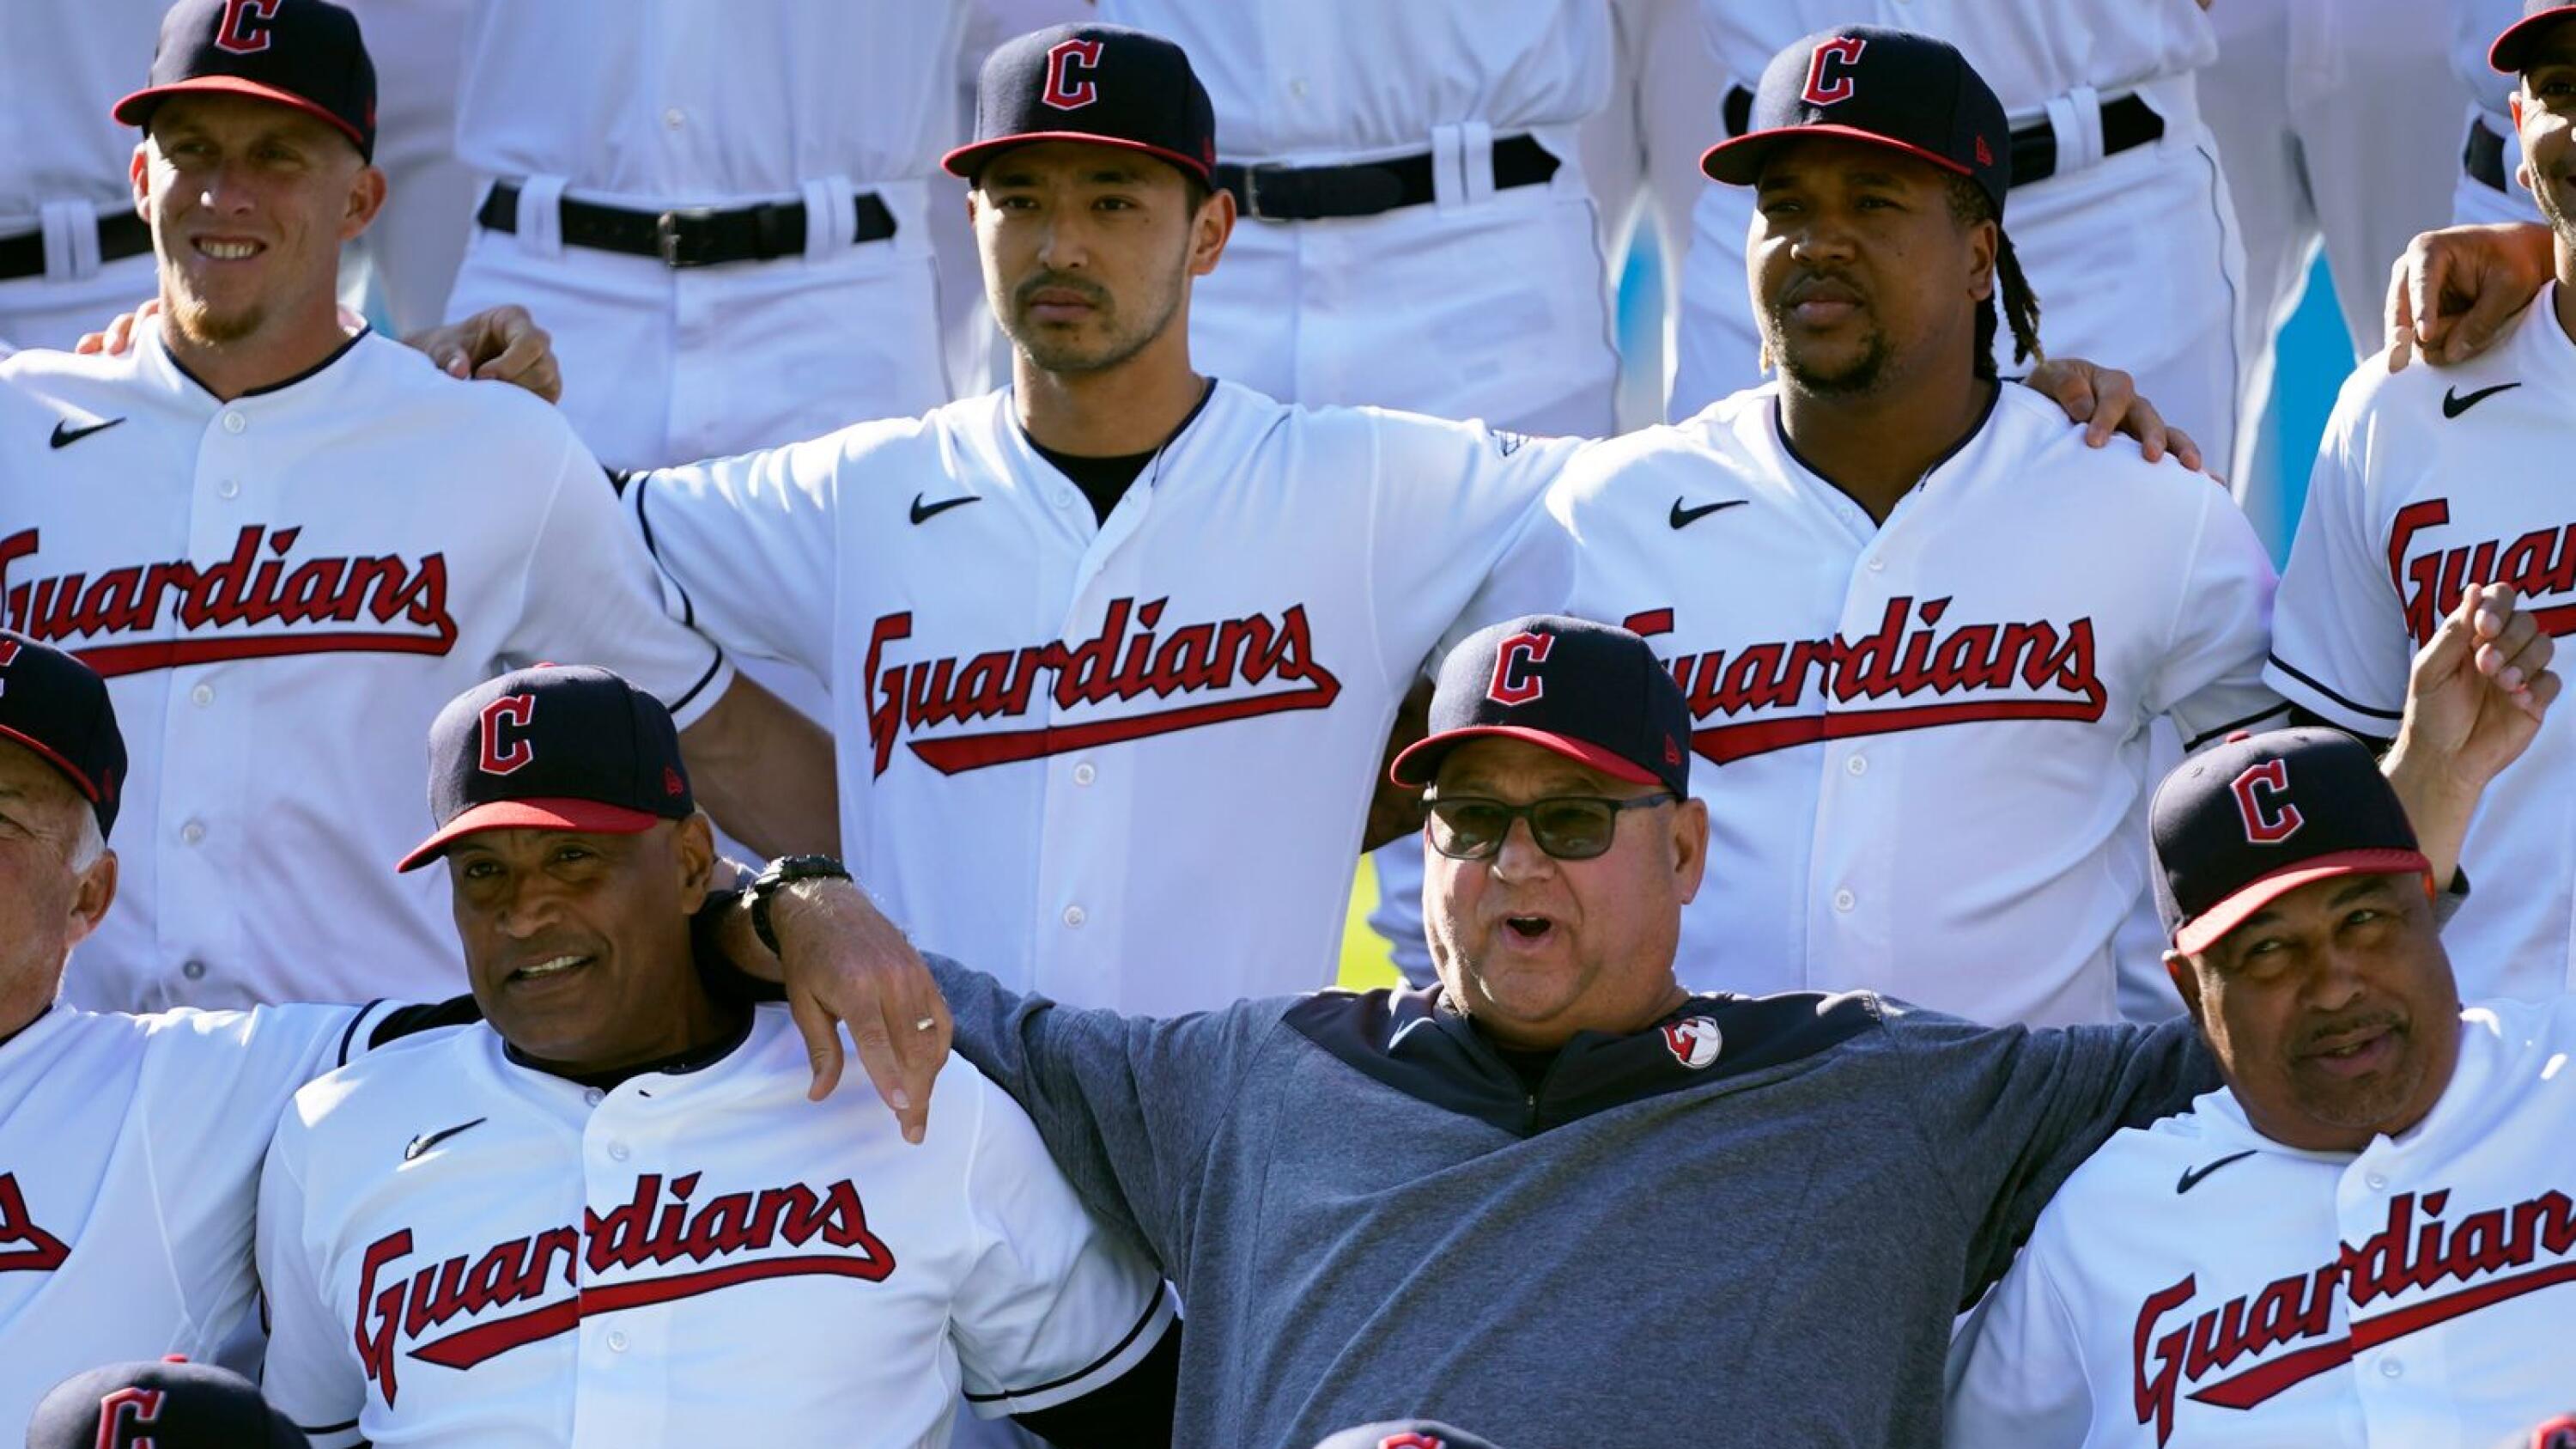 Guardians manager Terry Francona set to end career defined by class, touch